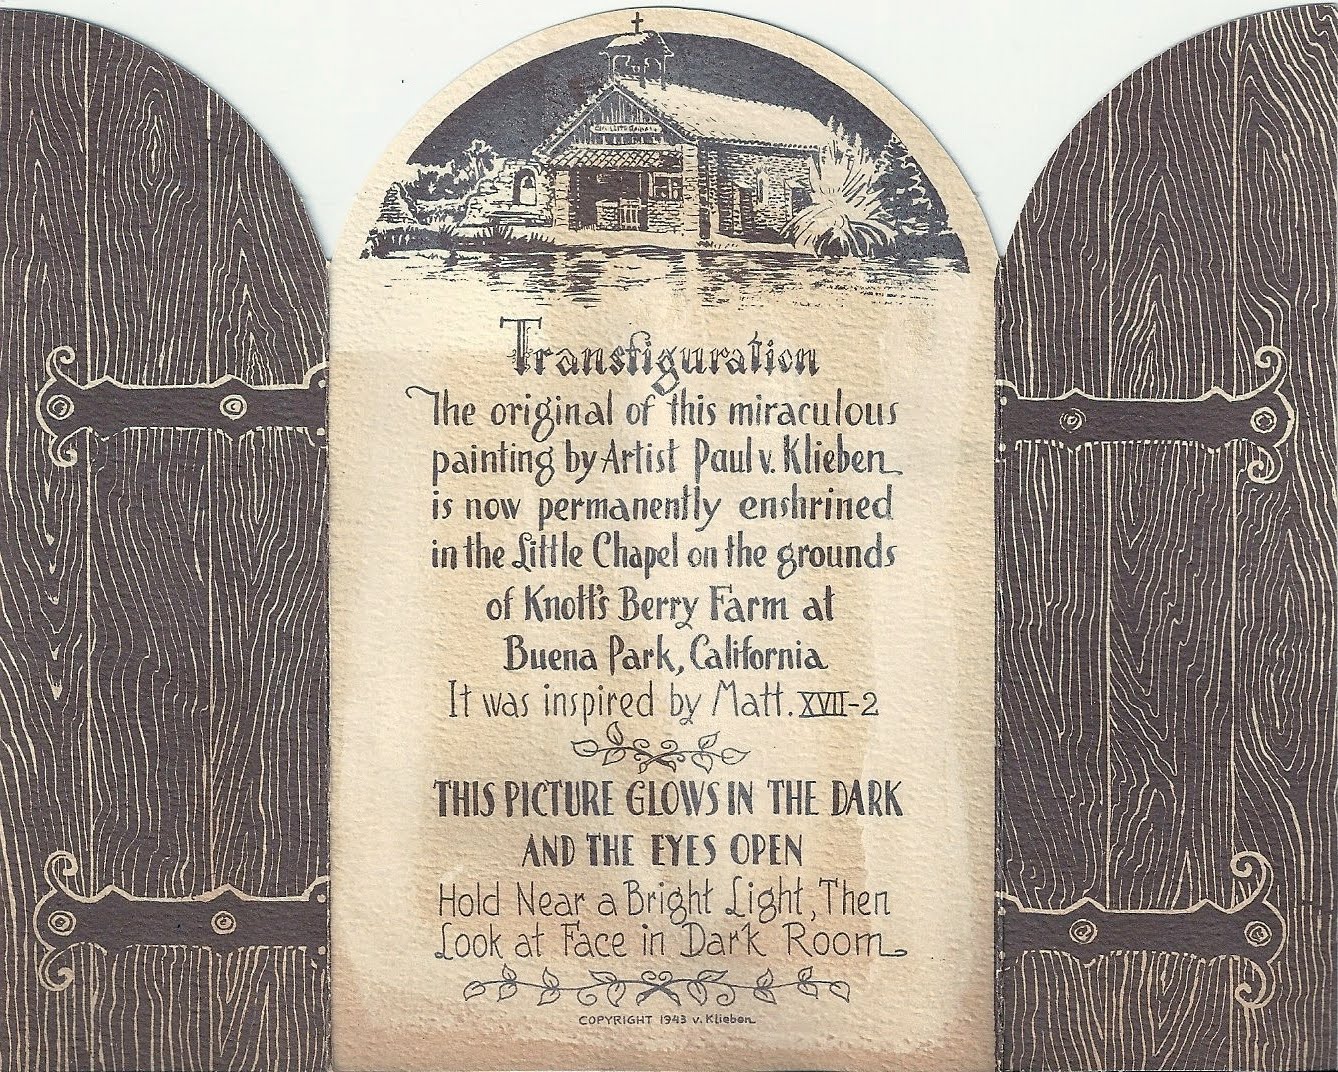 Transfiguration (back), Glow-in-the-dark souvenir from Our Little Chapel by the Lake, Reflection Lake, Knott's Berry Farm, Buena Park, California, 1943